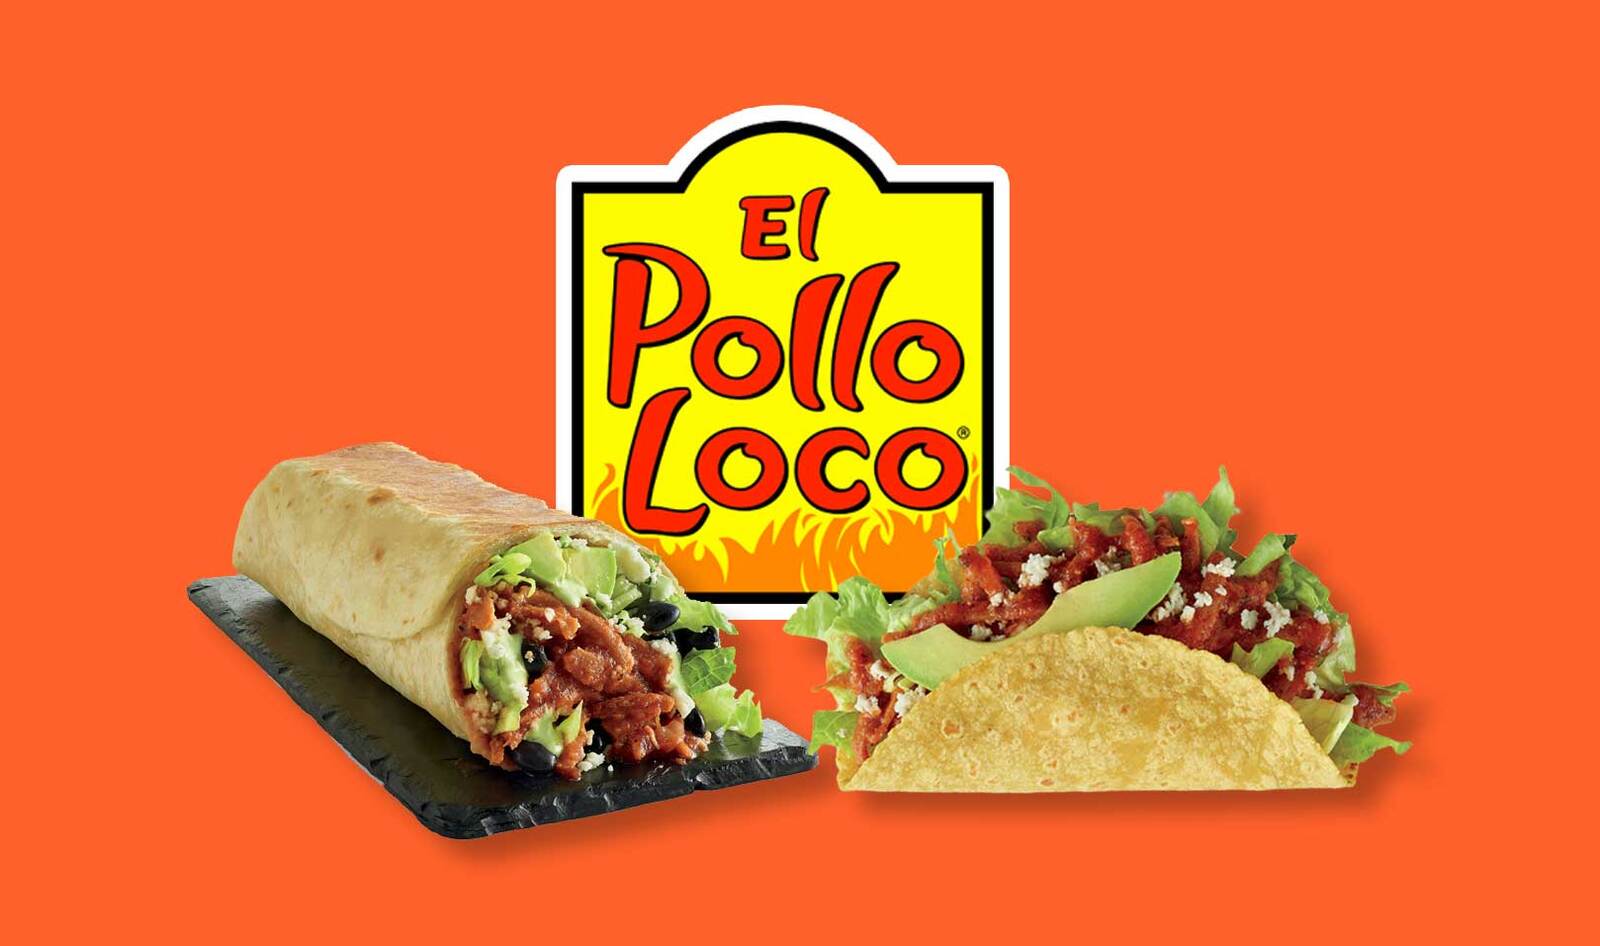 El Pollo Loco Adds Meatless Chicken to Menu Nationwide, But It Can't Be Ordered Vegan Yet